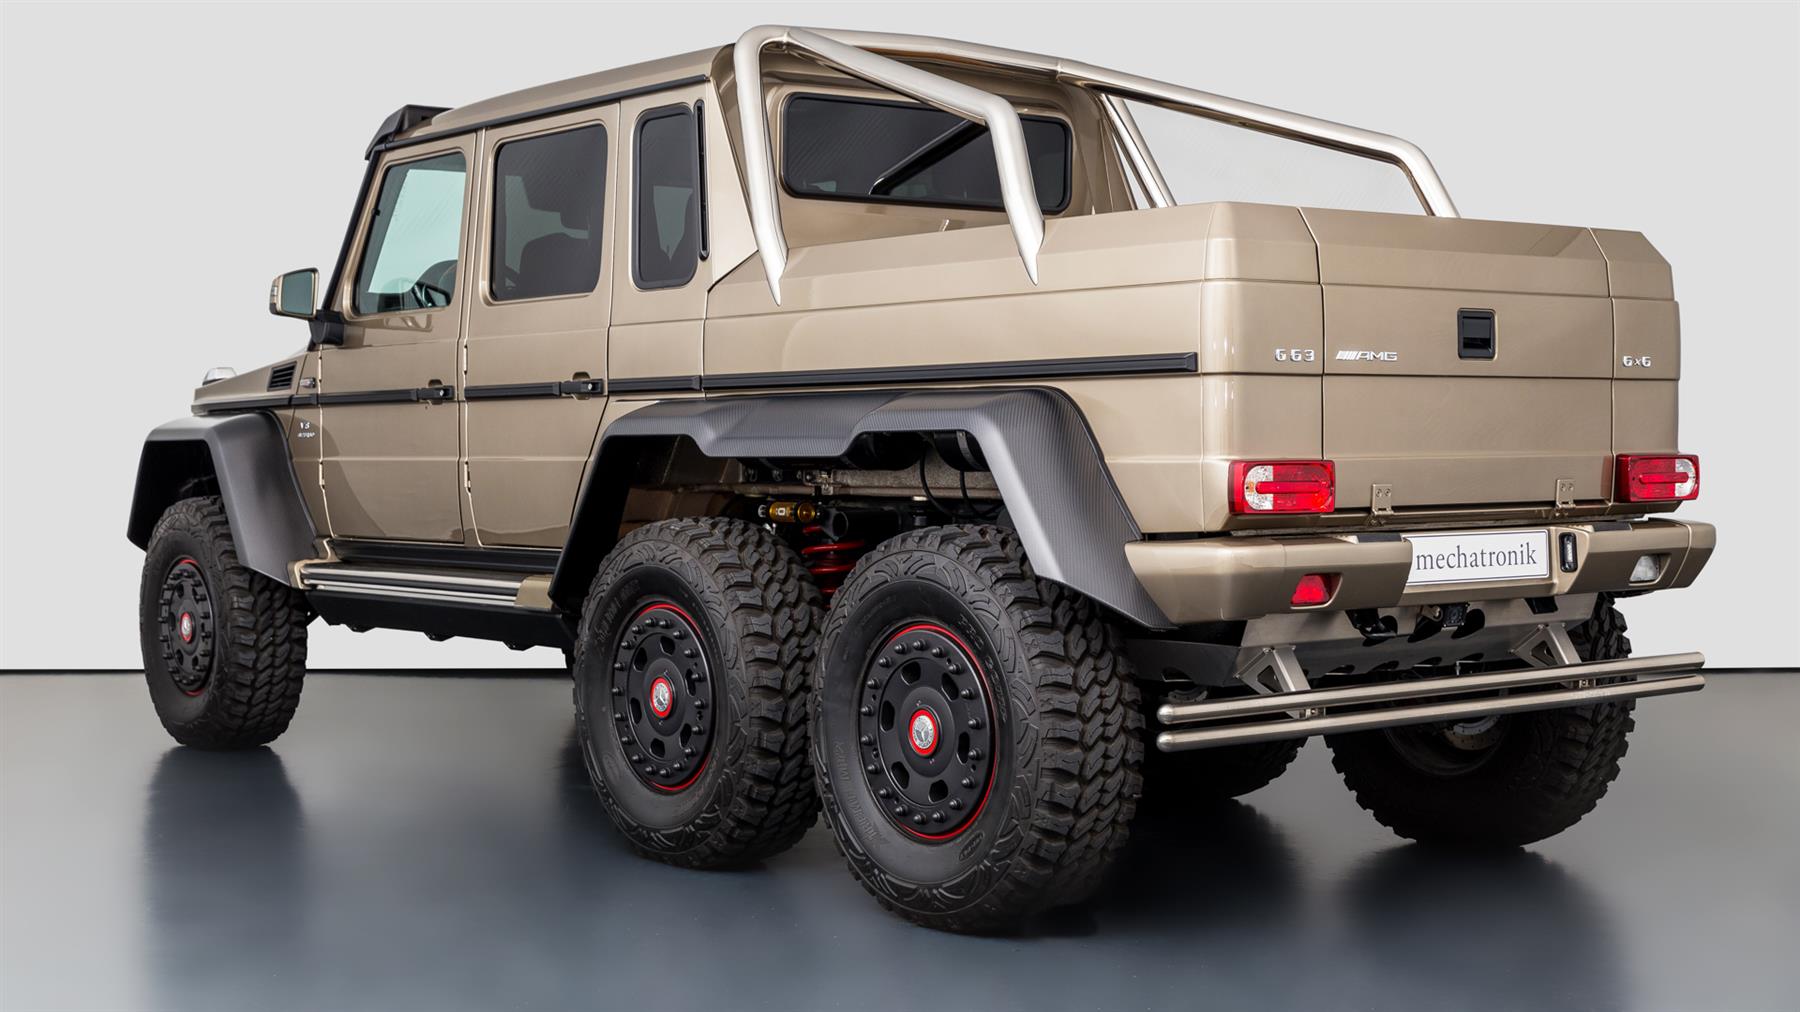 230Mile MercedesBenz G63 AMG 6x6 for Sale, Costs More Than a Dozen